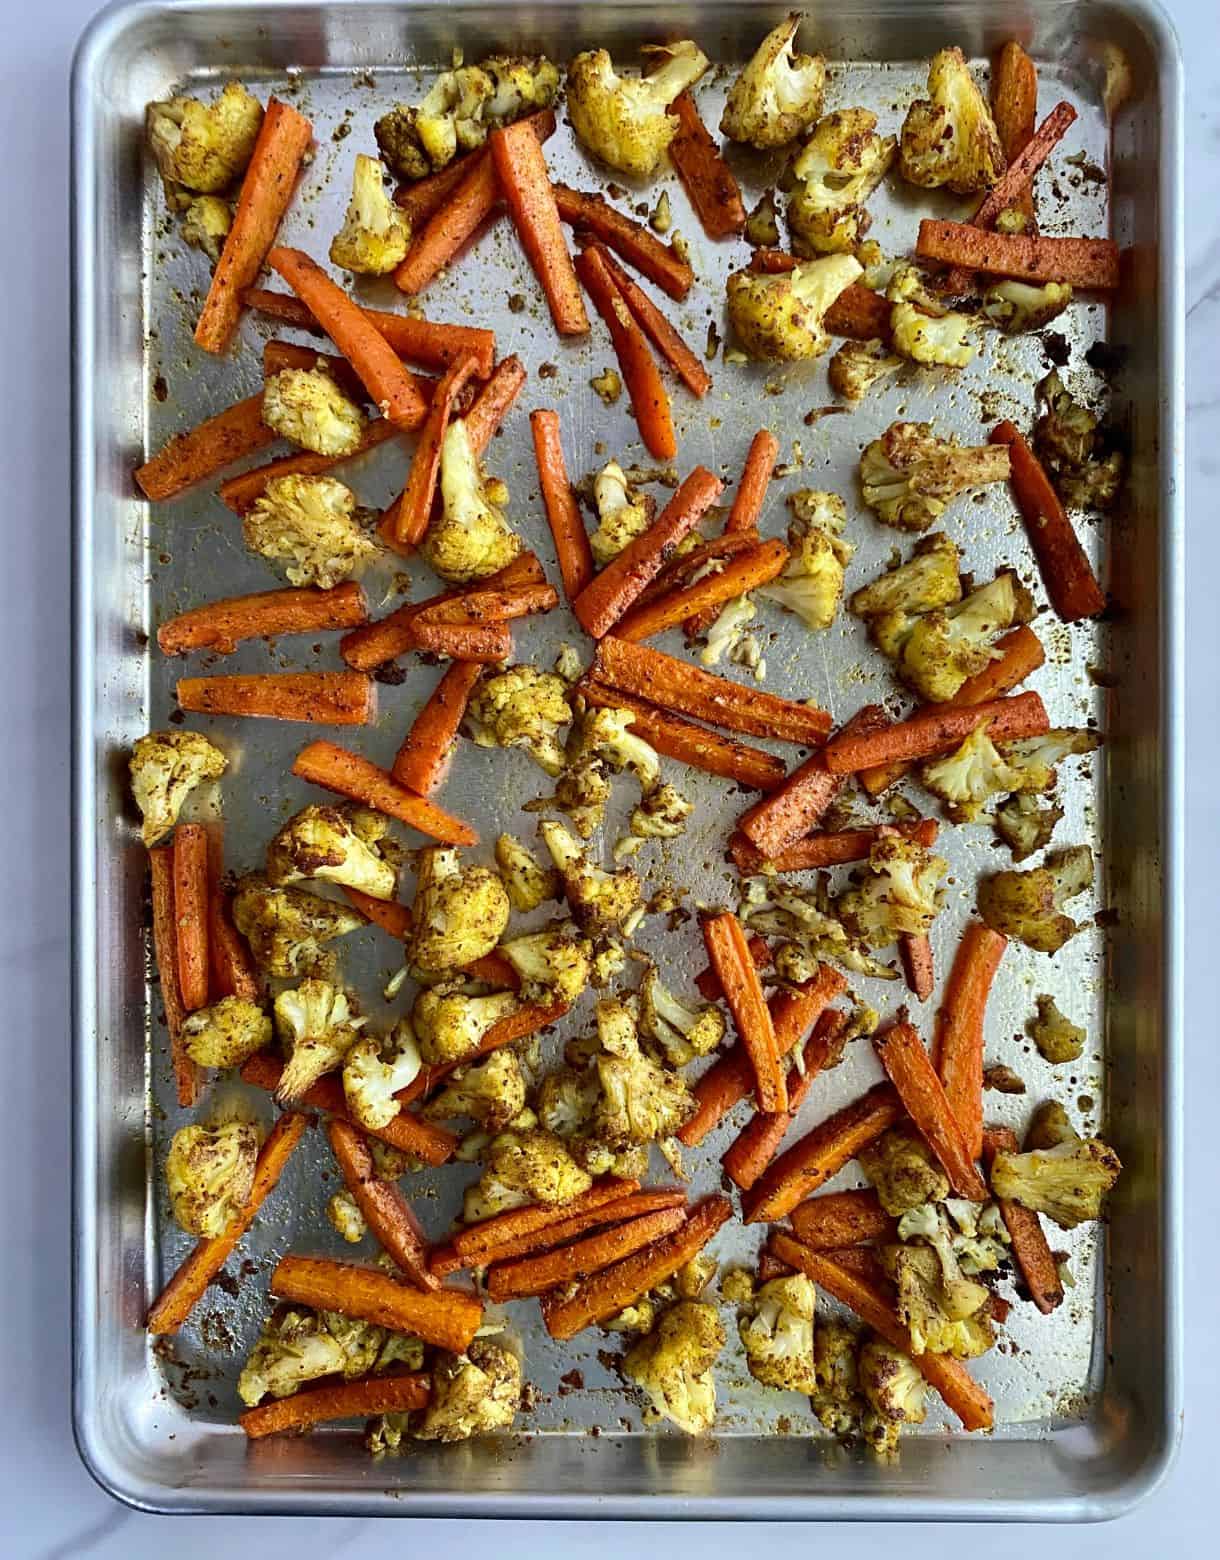 A sheet pan with cooked cauliflower and carrots on it.